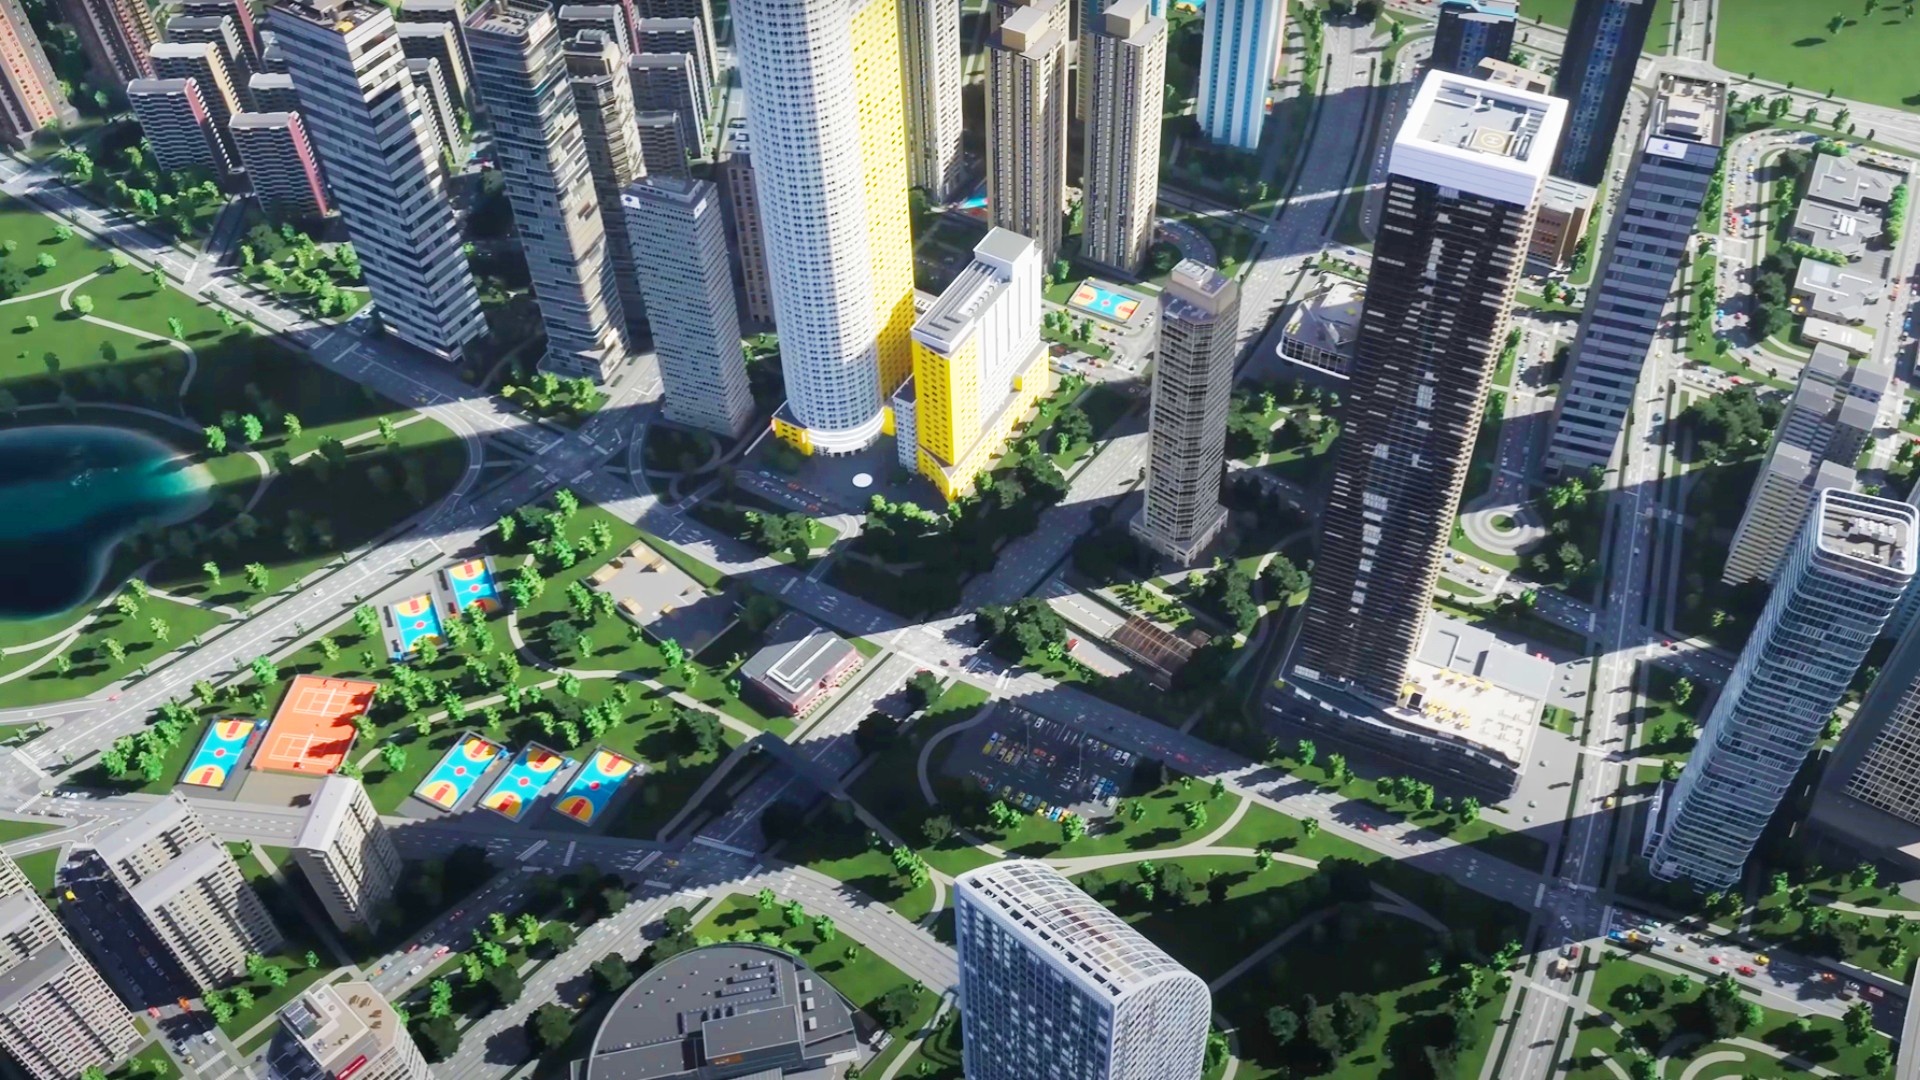 The Cities Skylines 2 economy was not up to standard, developer admits